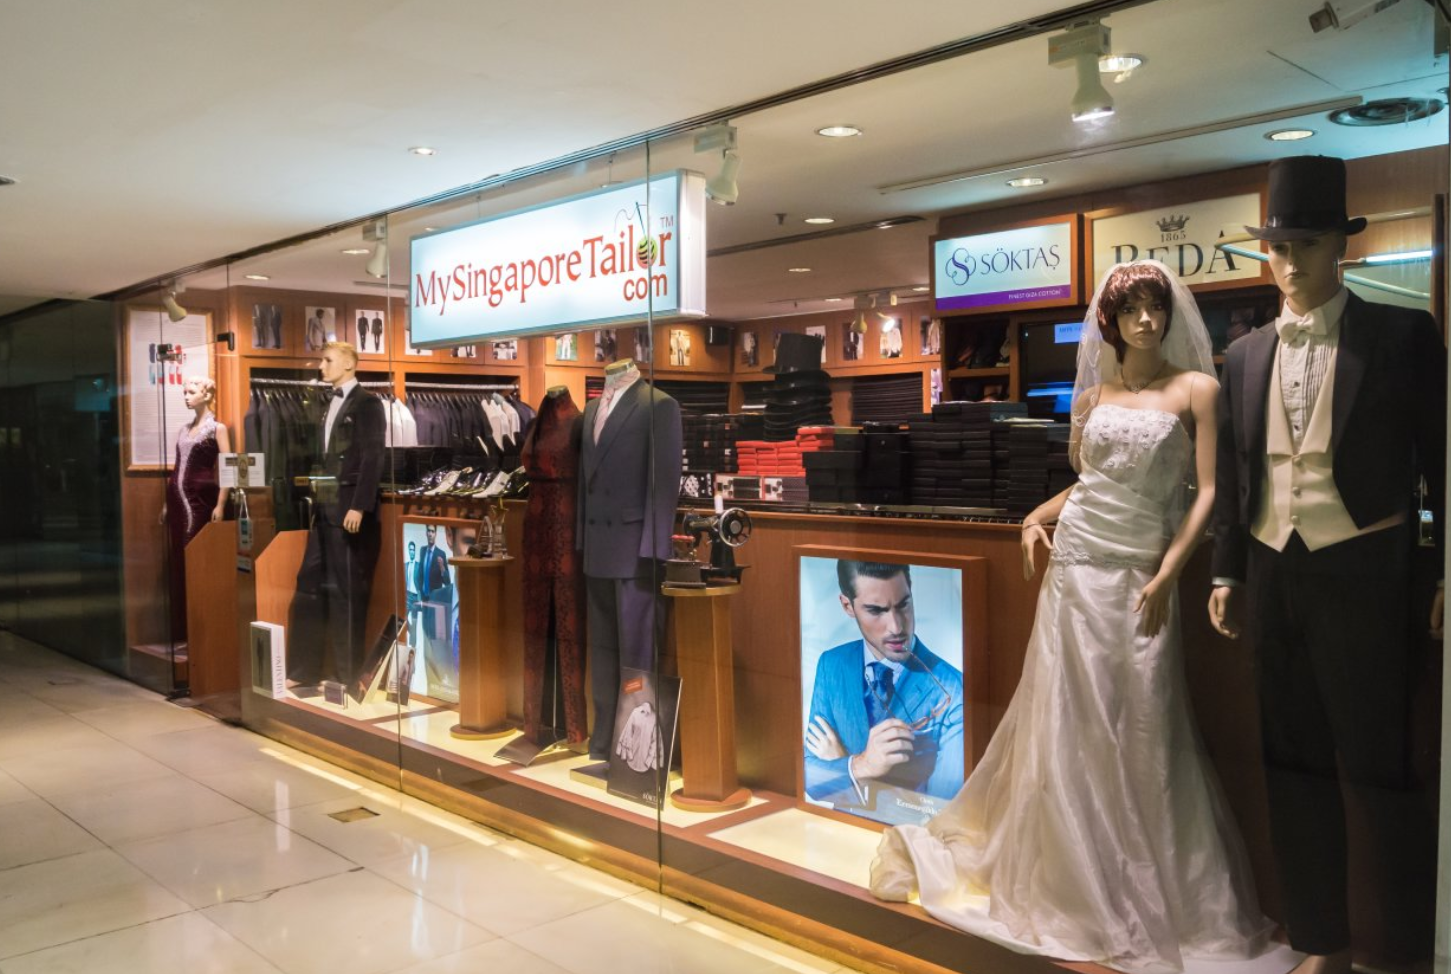 my-singapore-tailor-tailors-bespoke-suit-suits-rent-rental-hire-tuxedo-wedding-dinner-formal-prom-groom-bridal-043